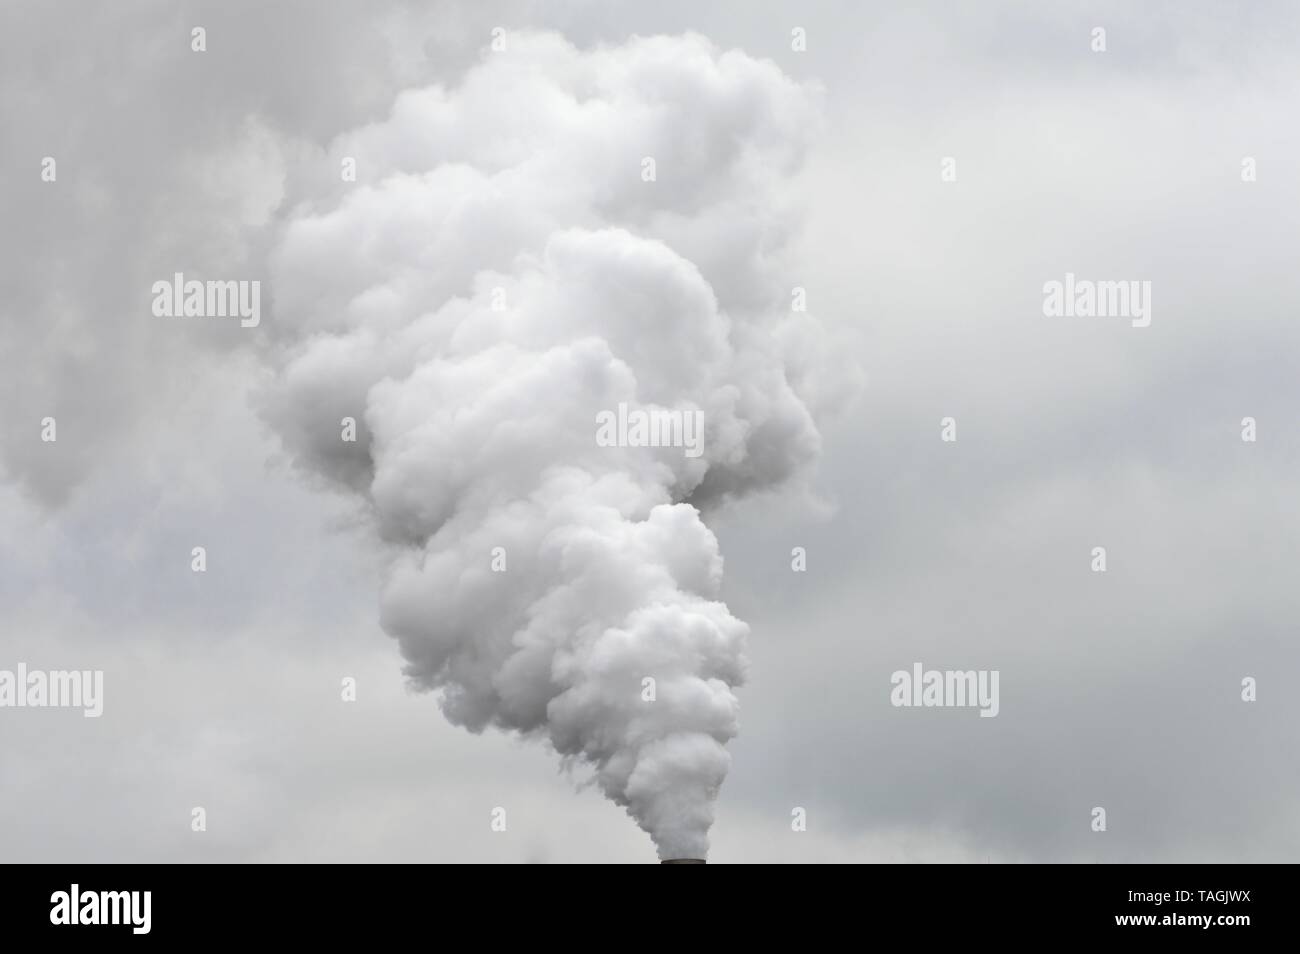 impressing cloud of smoke joining the rain clouds in the sky Stock Photo